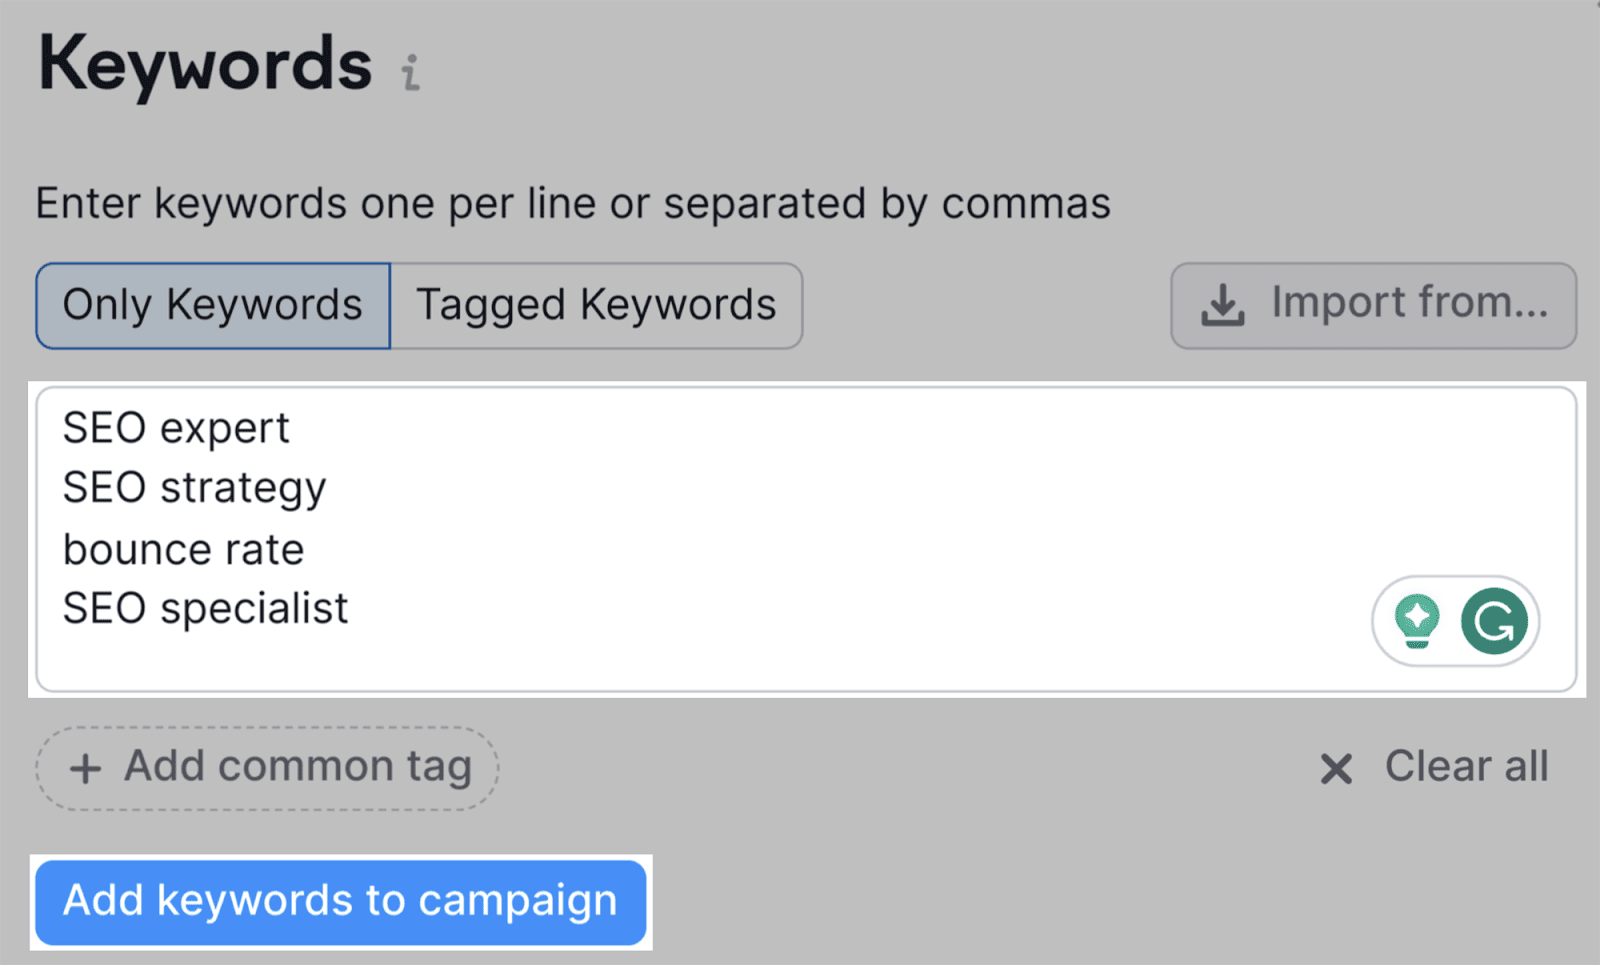 Add keywords to the campaign